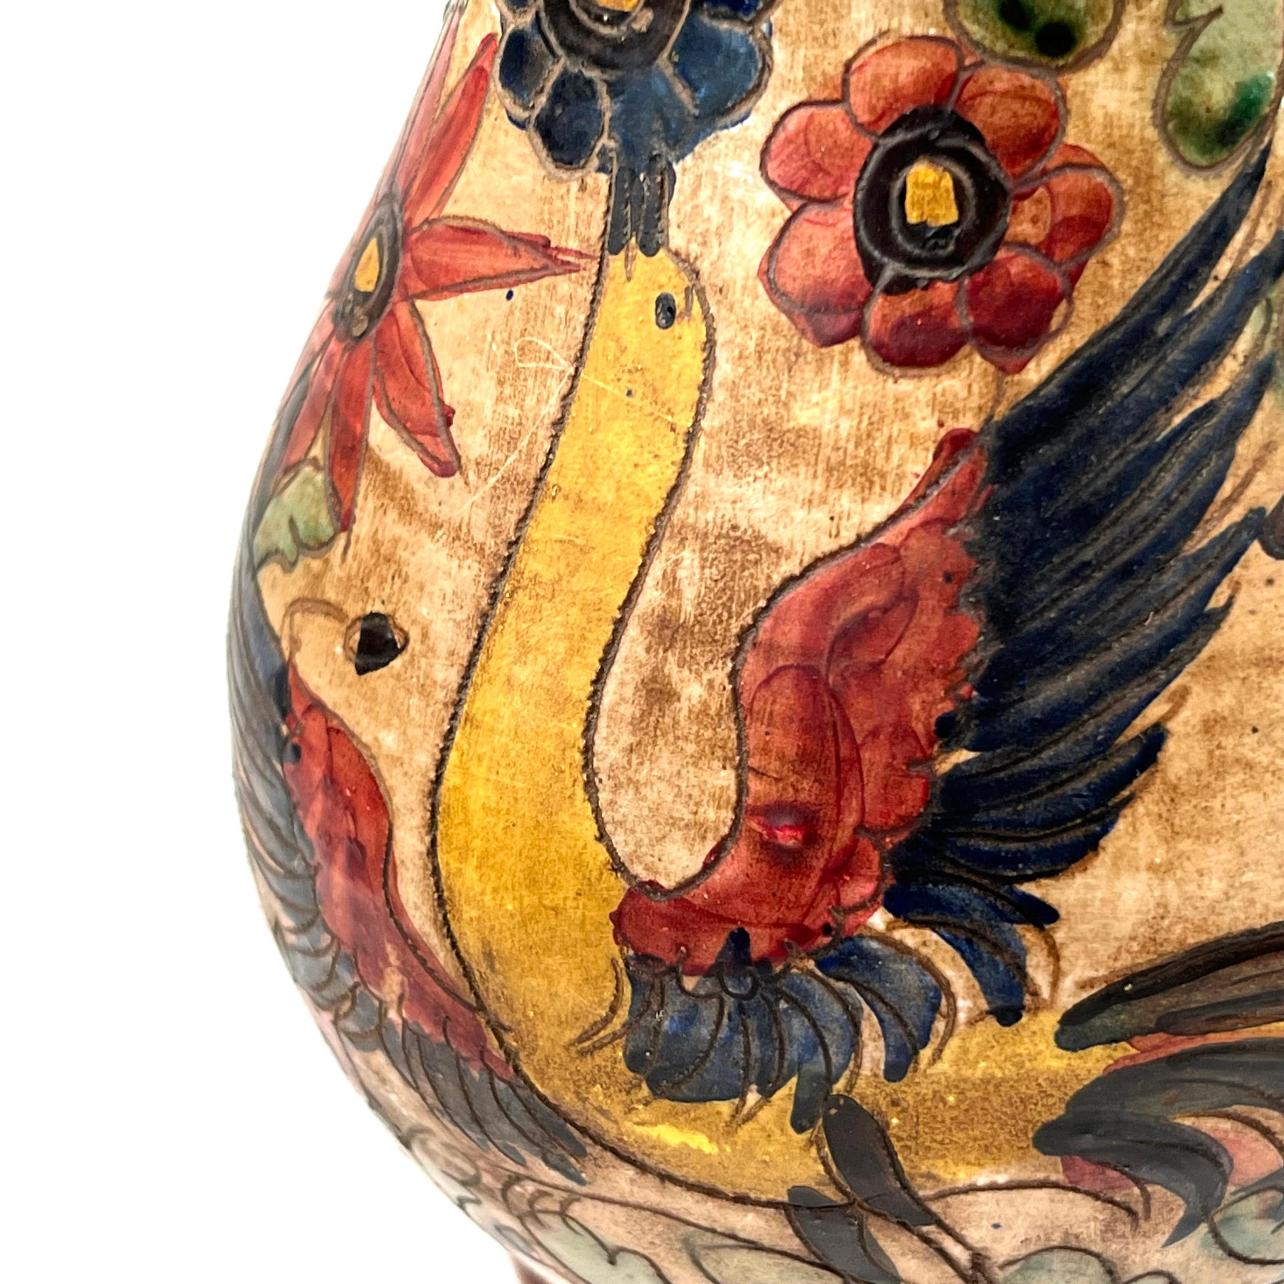  Italian Hand Painted Pottery Vase with Flowers and Birds Circa 19th C. For Sale 1